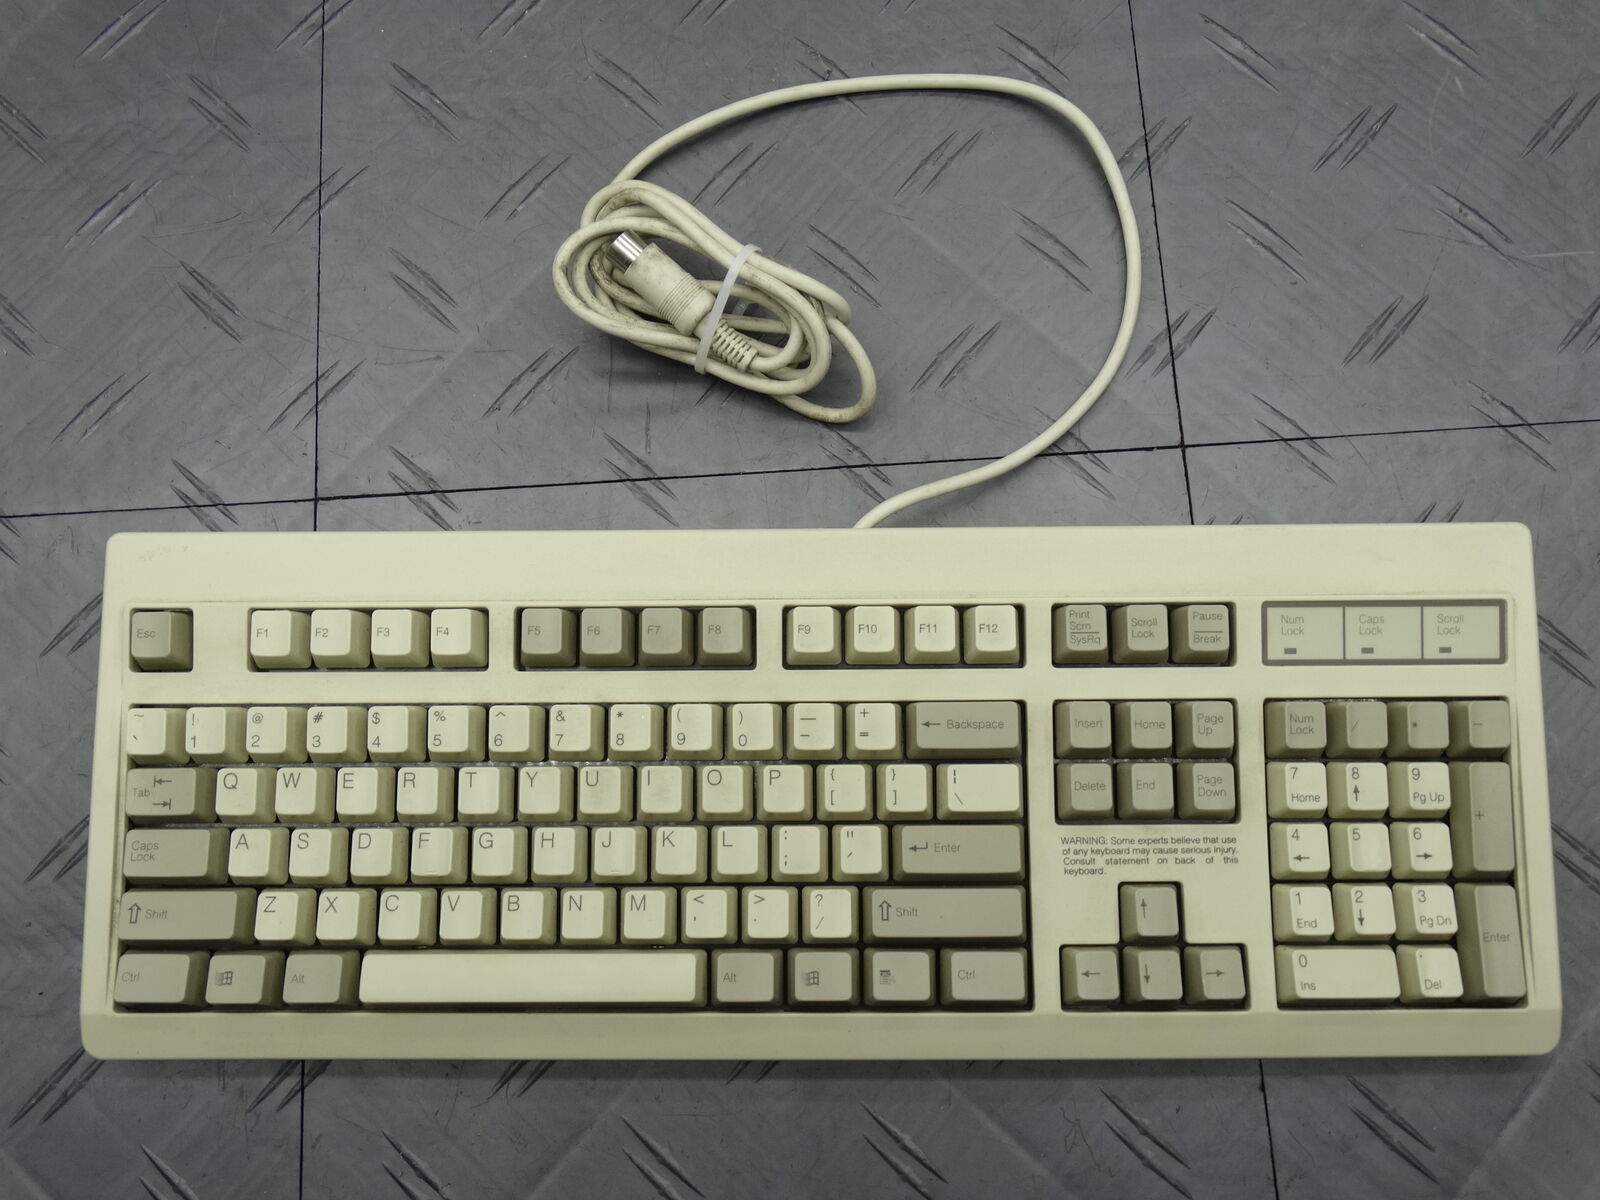 NMB Clicky Mechanical Keyboard RT6655TW Vintage Mainframe Keyboard